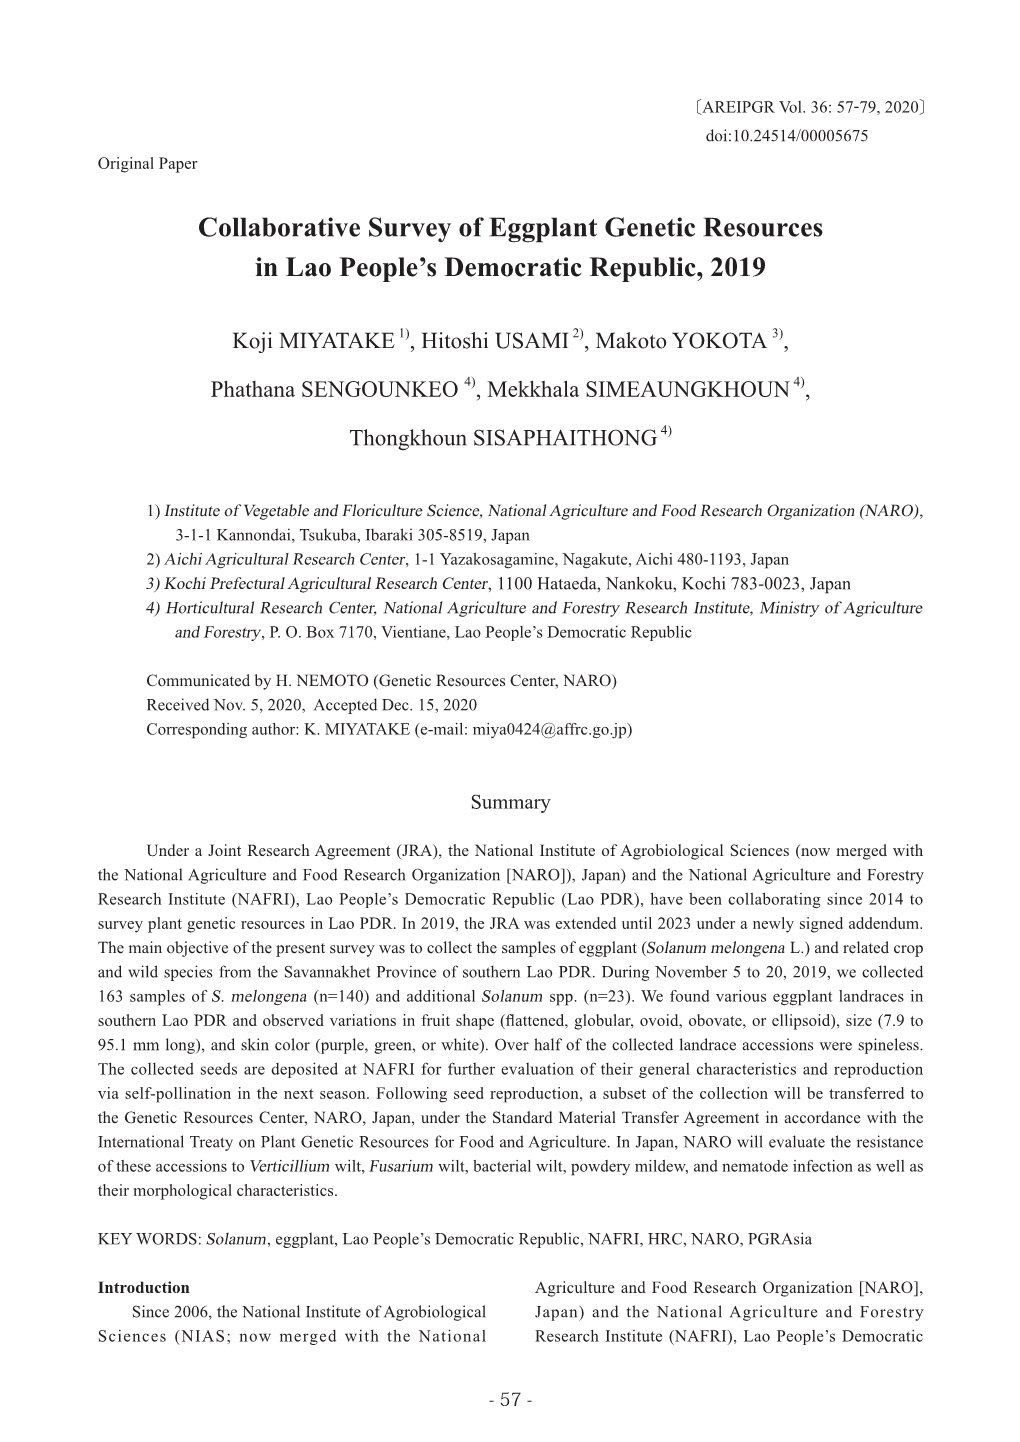 Collaborative Survey of Eggplant Genetic Resources in Lao People's